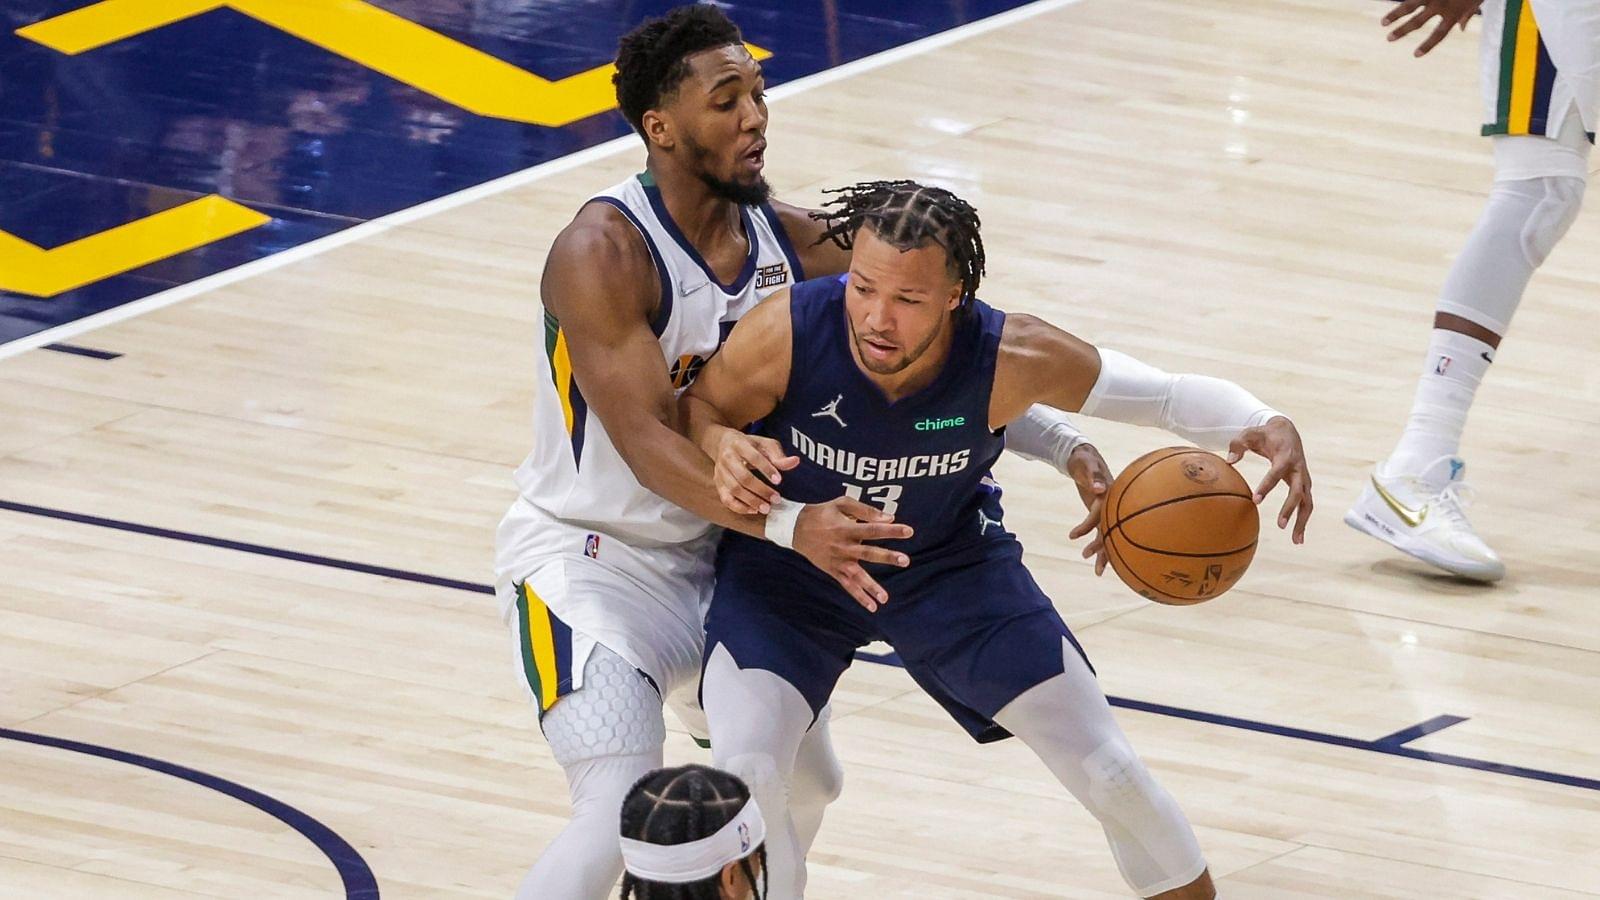 "Not Stephen Curry, not Luka Doncic, but JALEN freakin BRUNSON is the top scorer?": NBA Twitter is awe struck by the sudden rise of Mavericks point guard against Utah Jazz